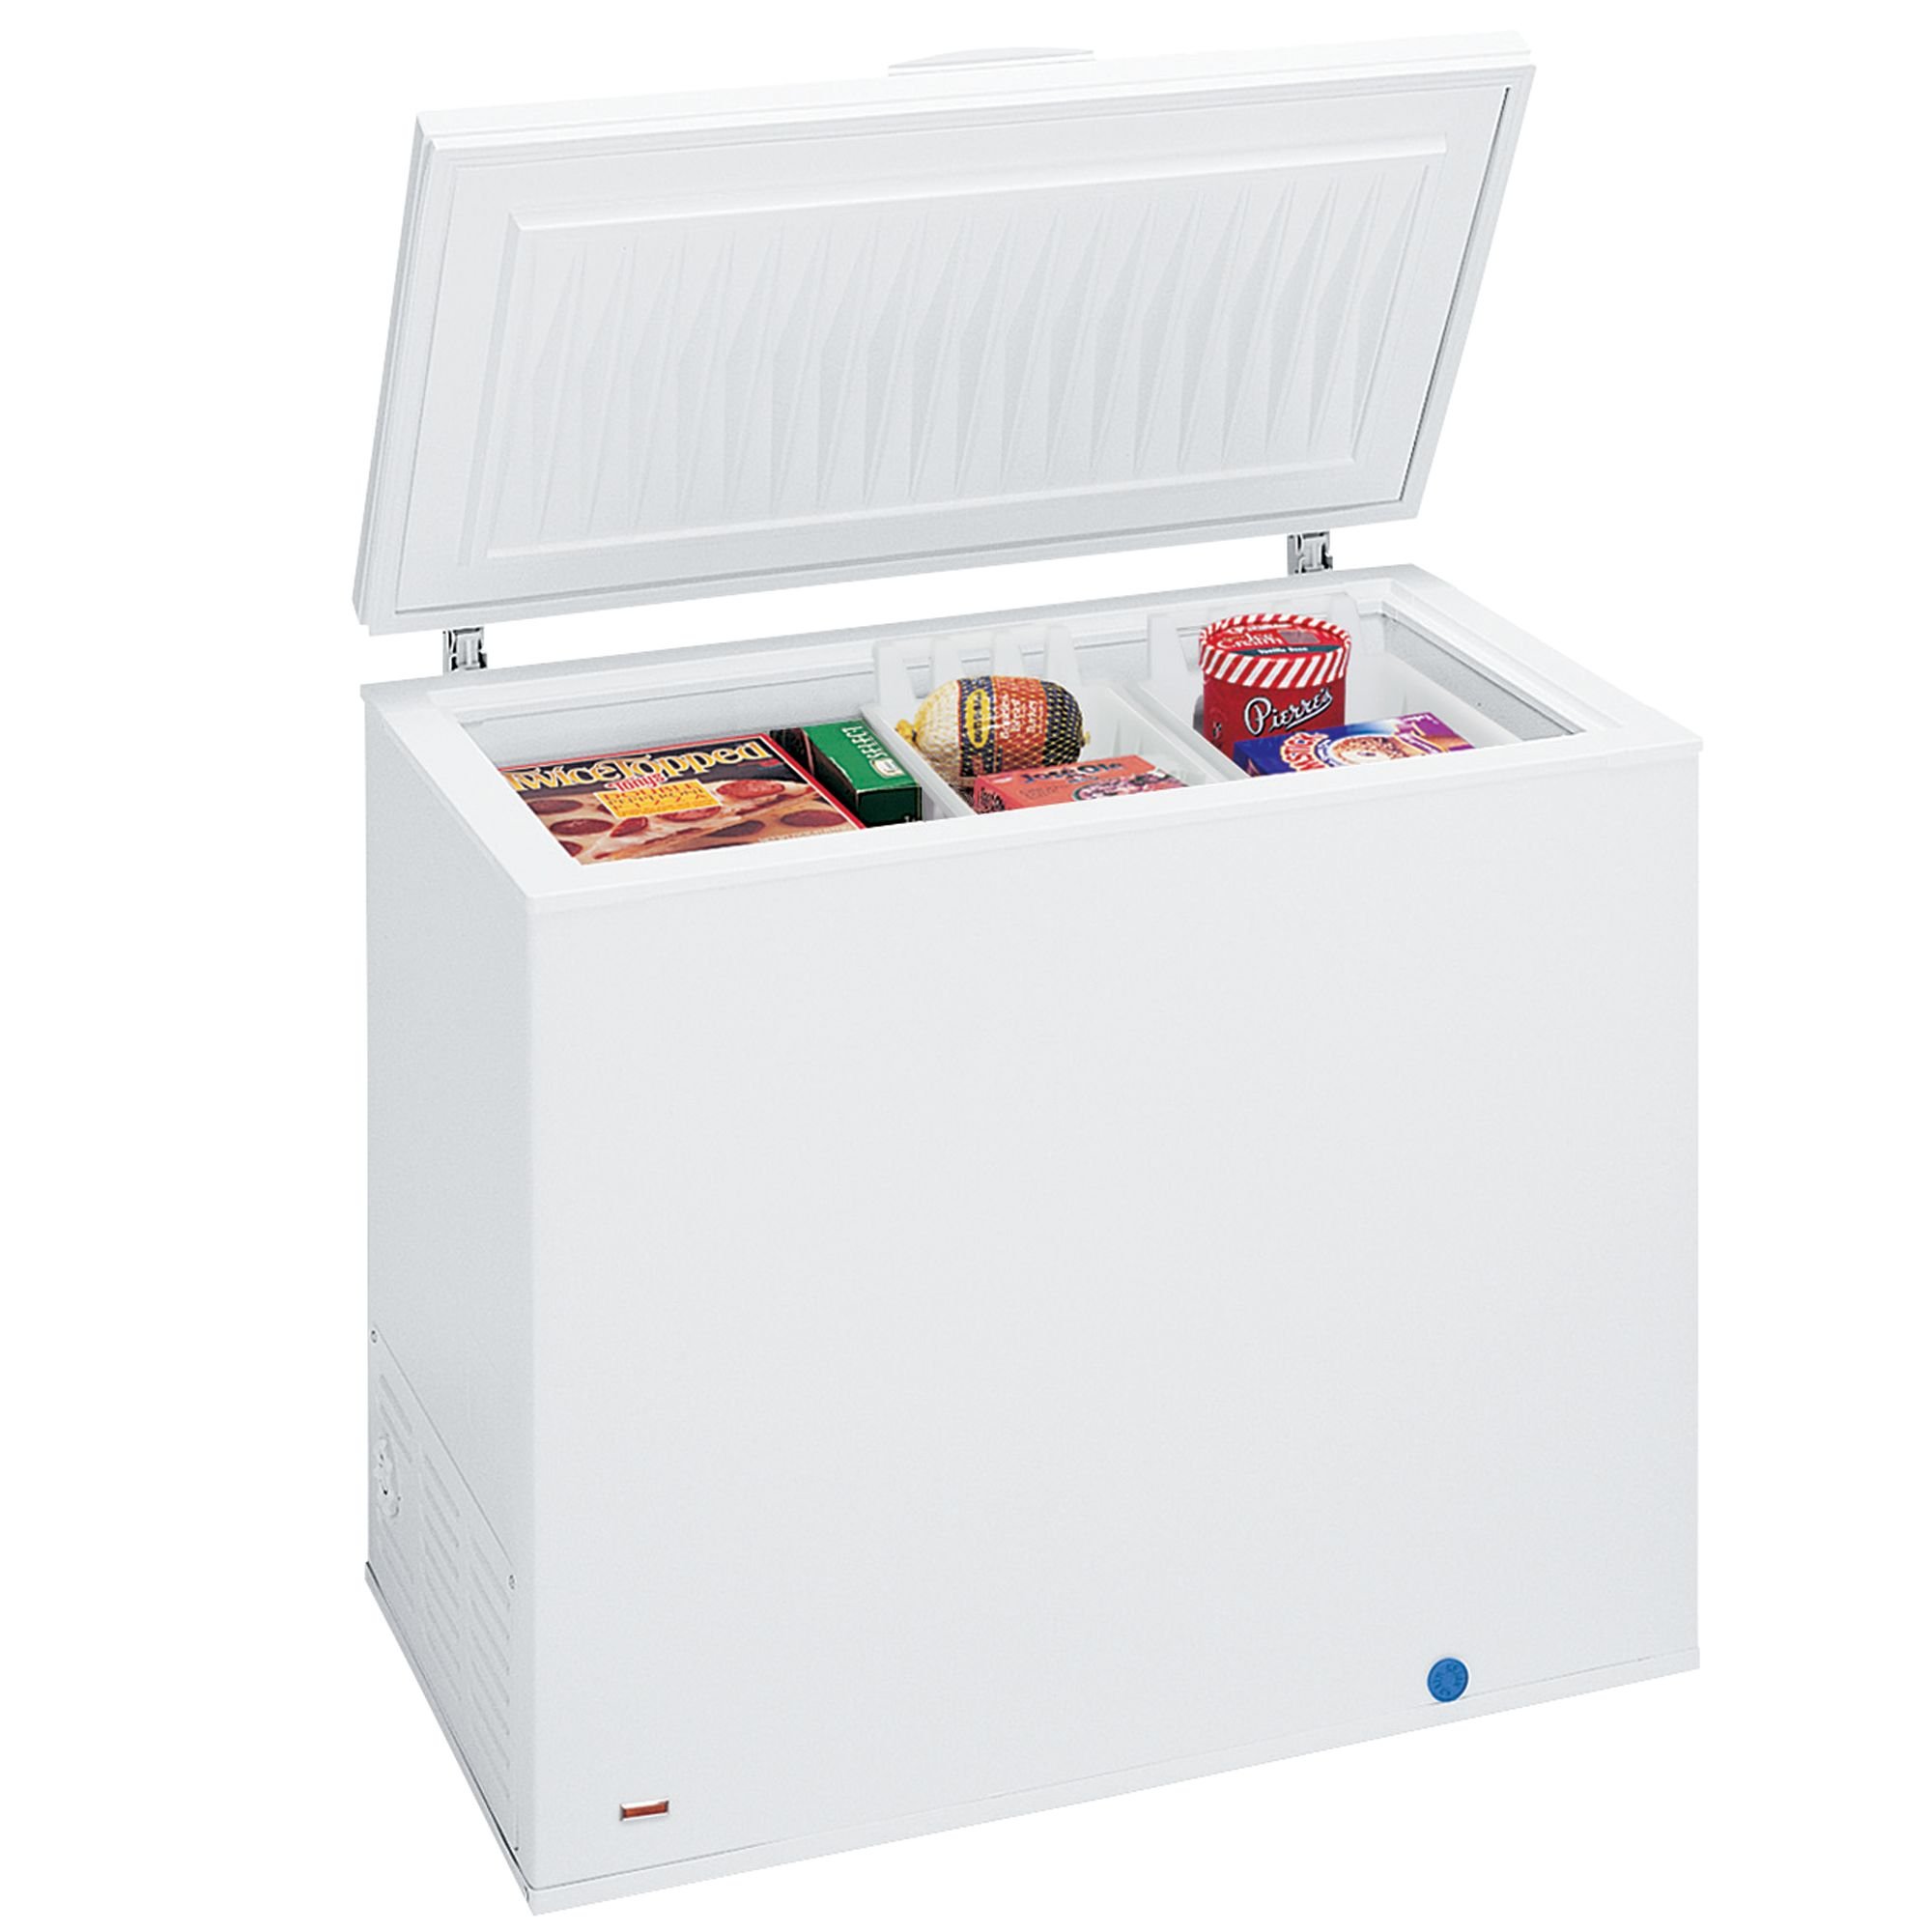 Kenmore-ches-freezer